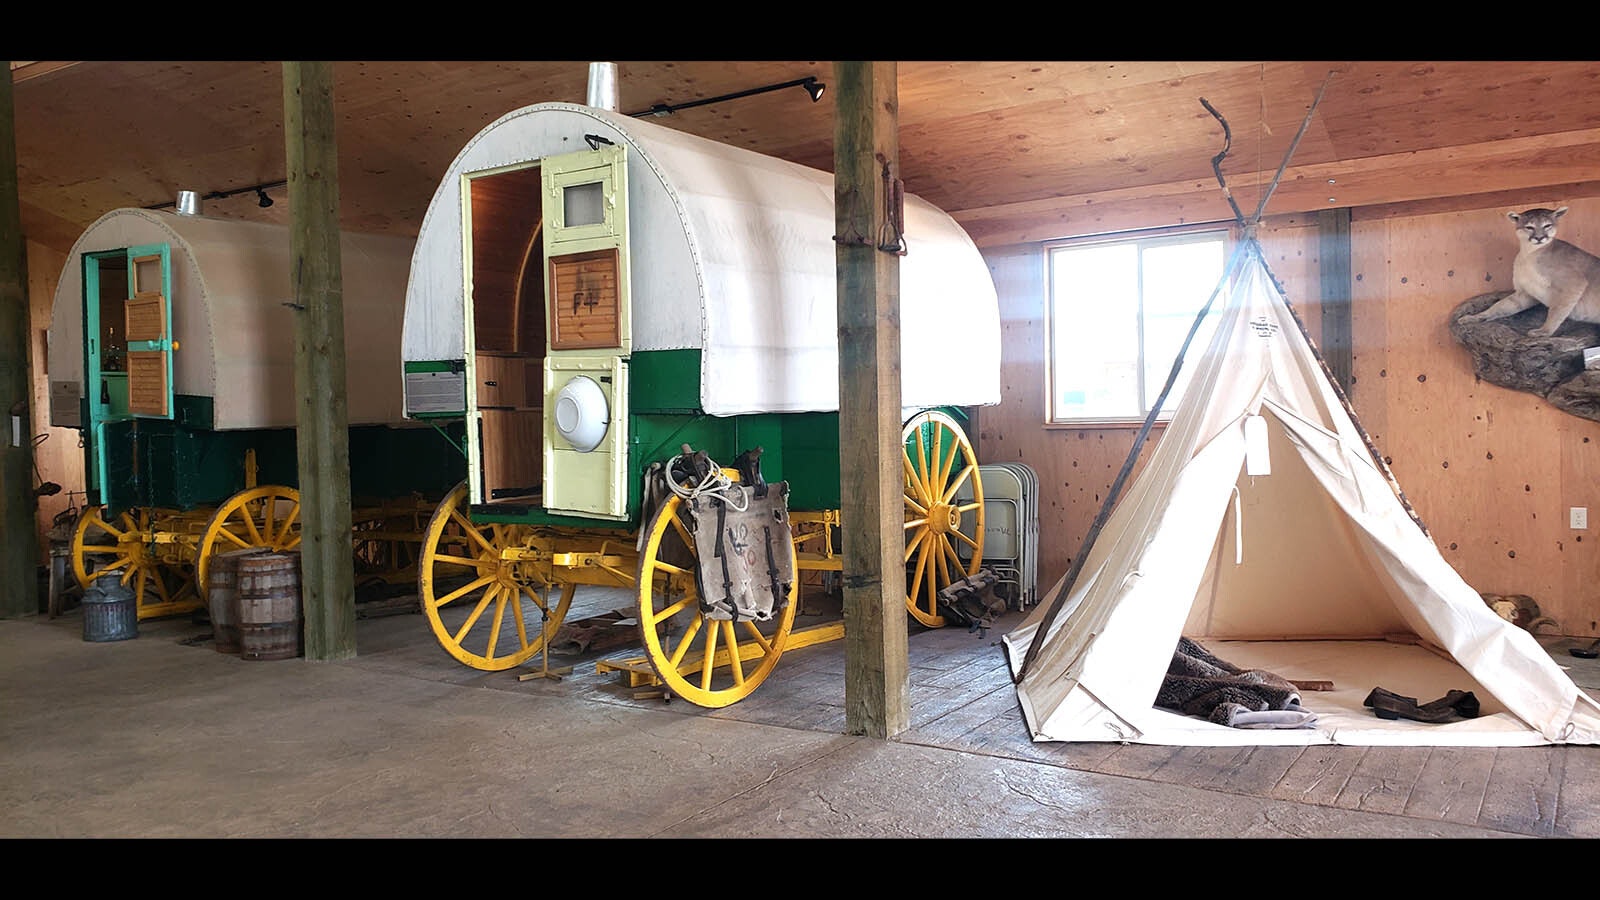 A few of the sheep wagons on display at the Little Snake River Museum in Savery. Savery was once the leading sheep producer in America.